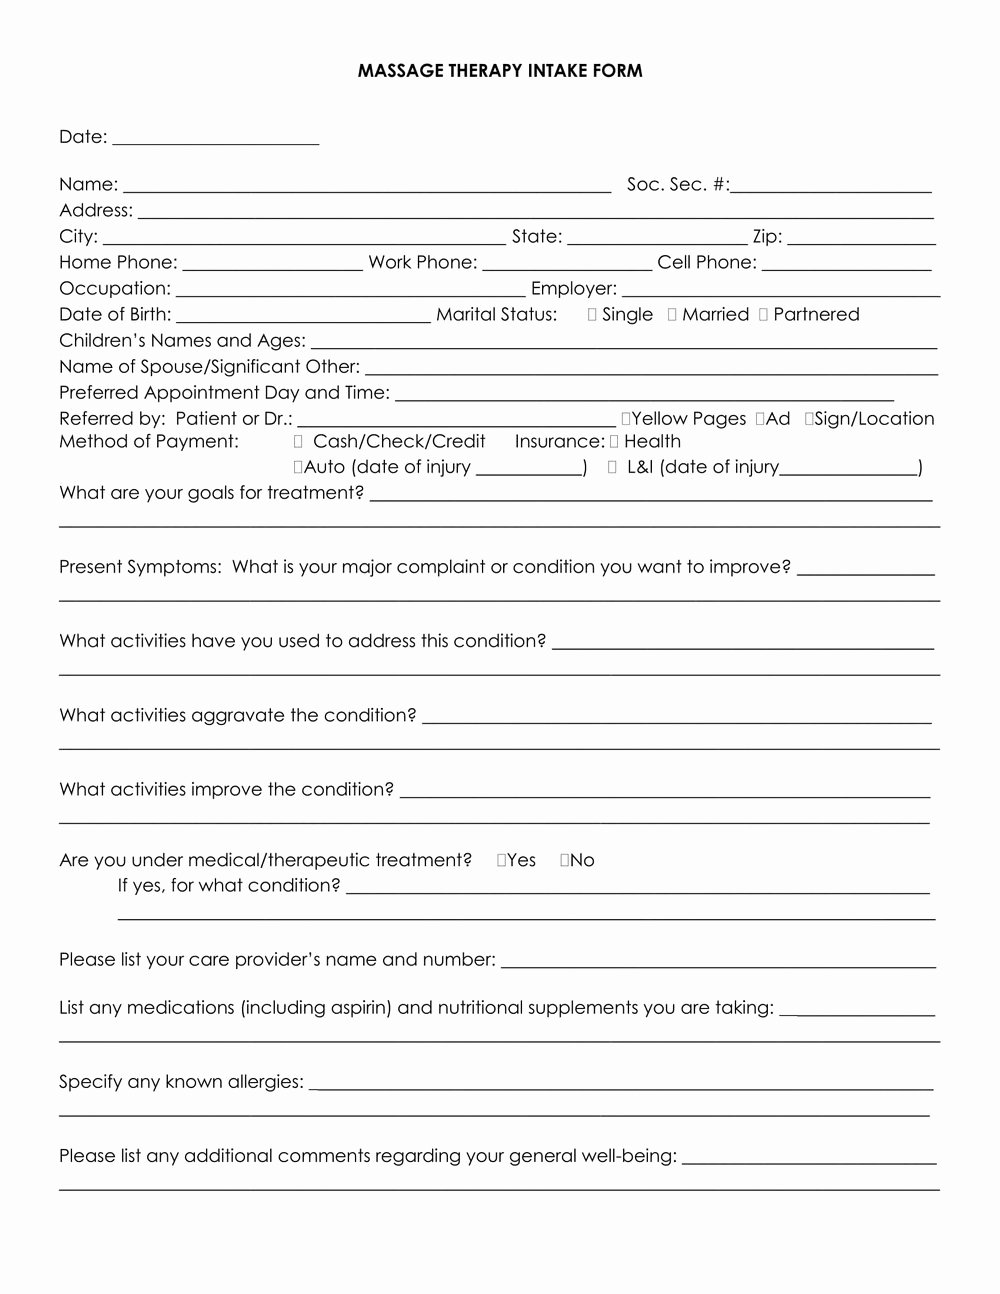 Counseling Intake form Template New Massage therapy Client Intake form Template forms 3775